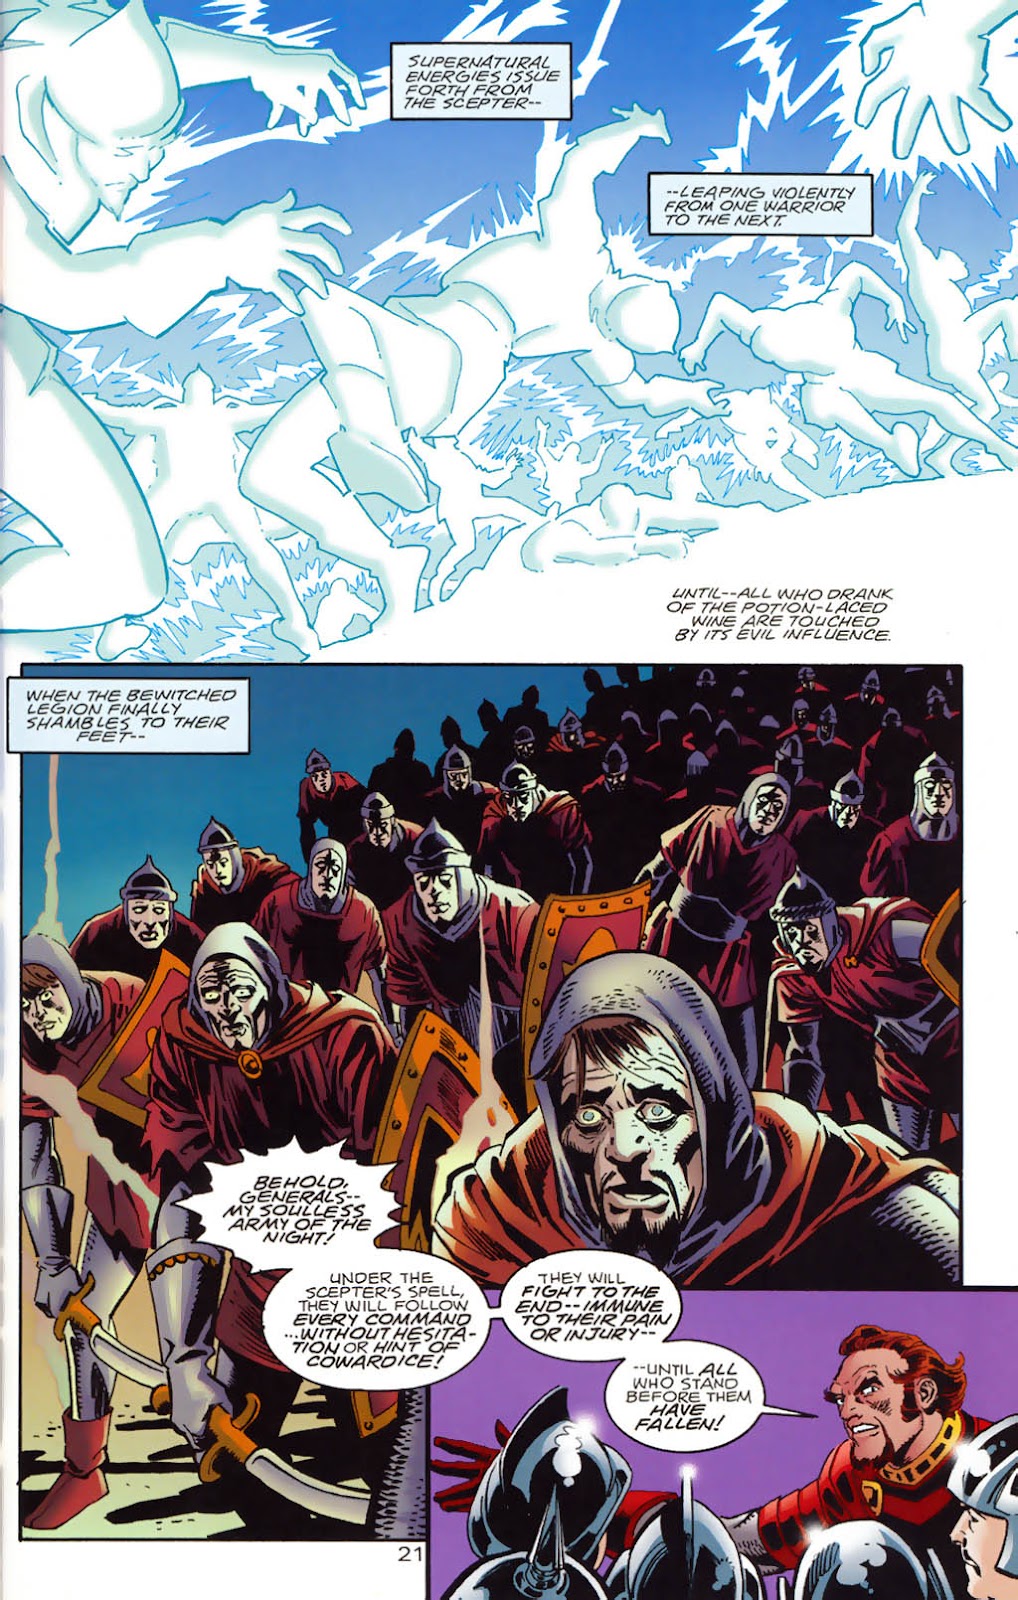 Batman: Dark Knight of the Round Table issue 2 - Page 23